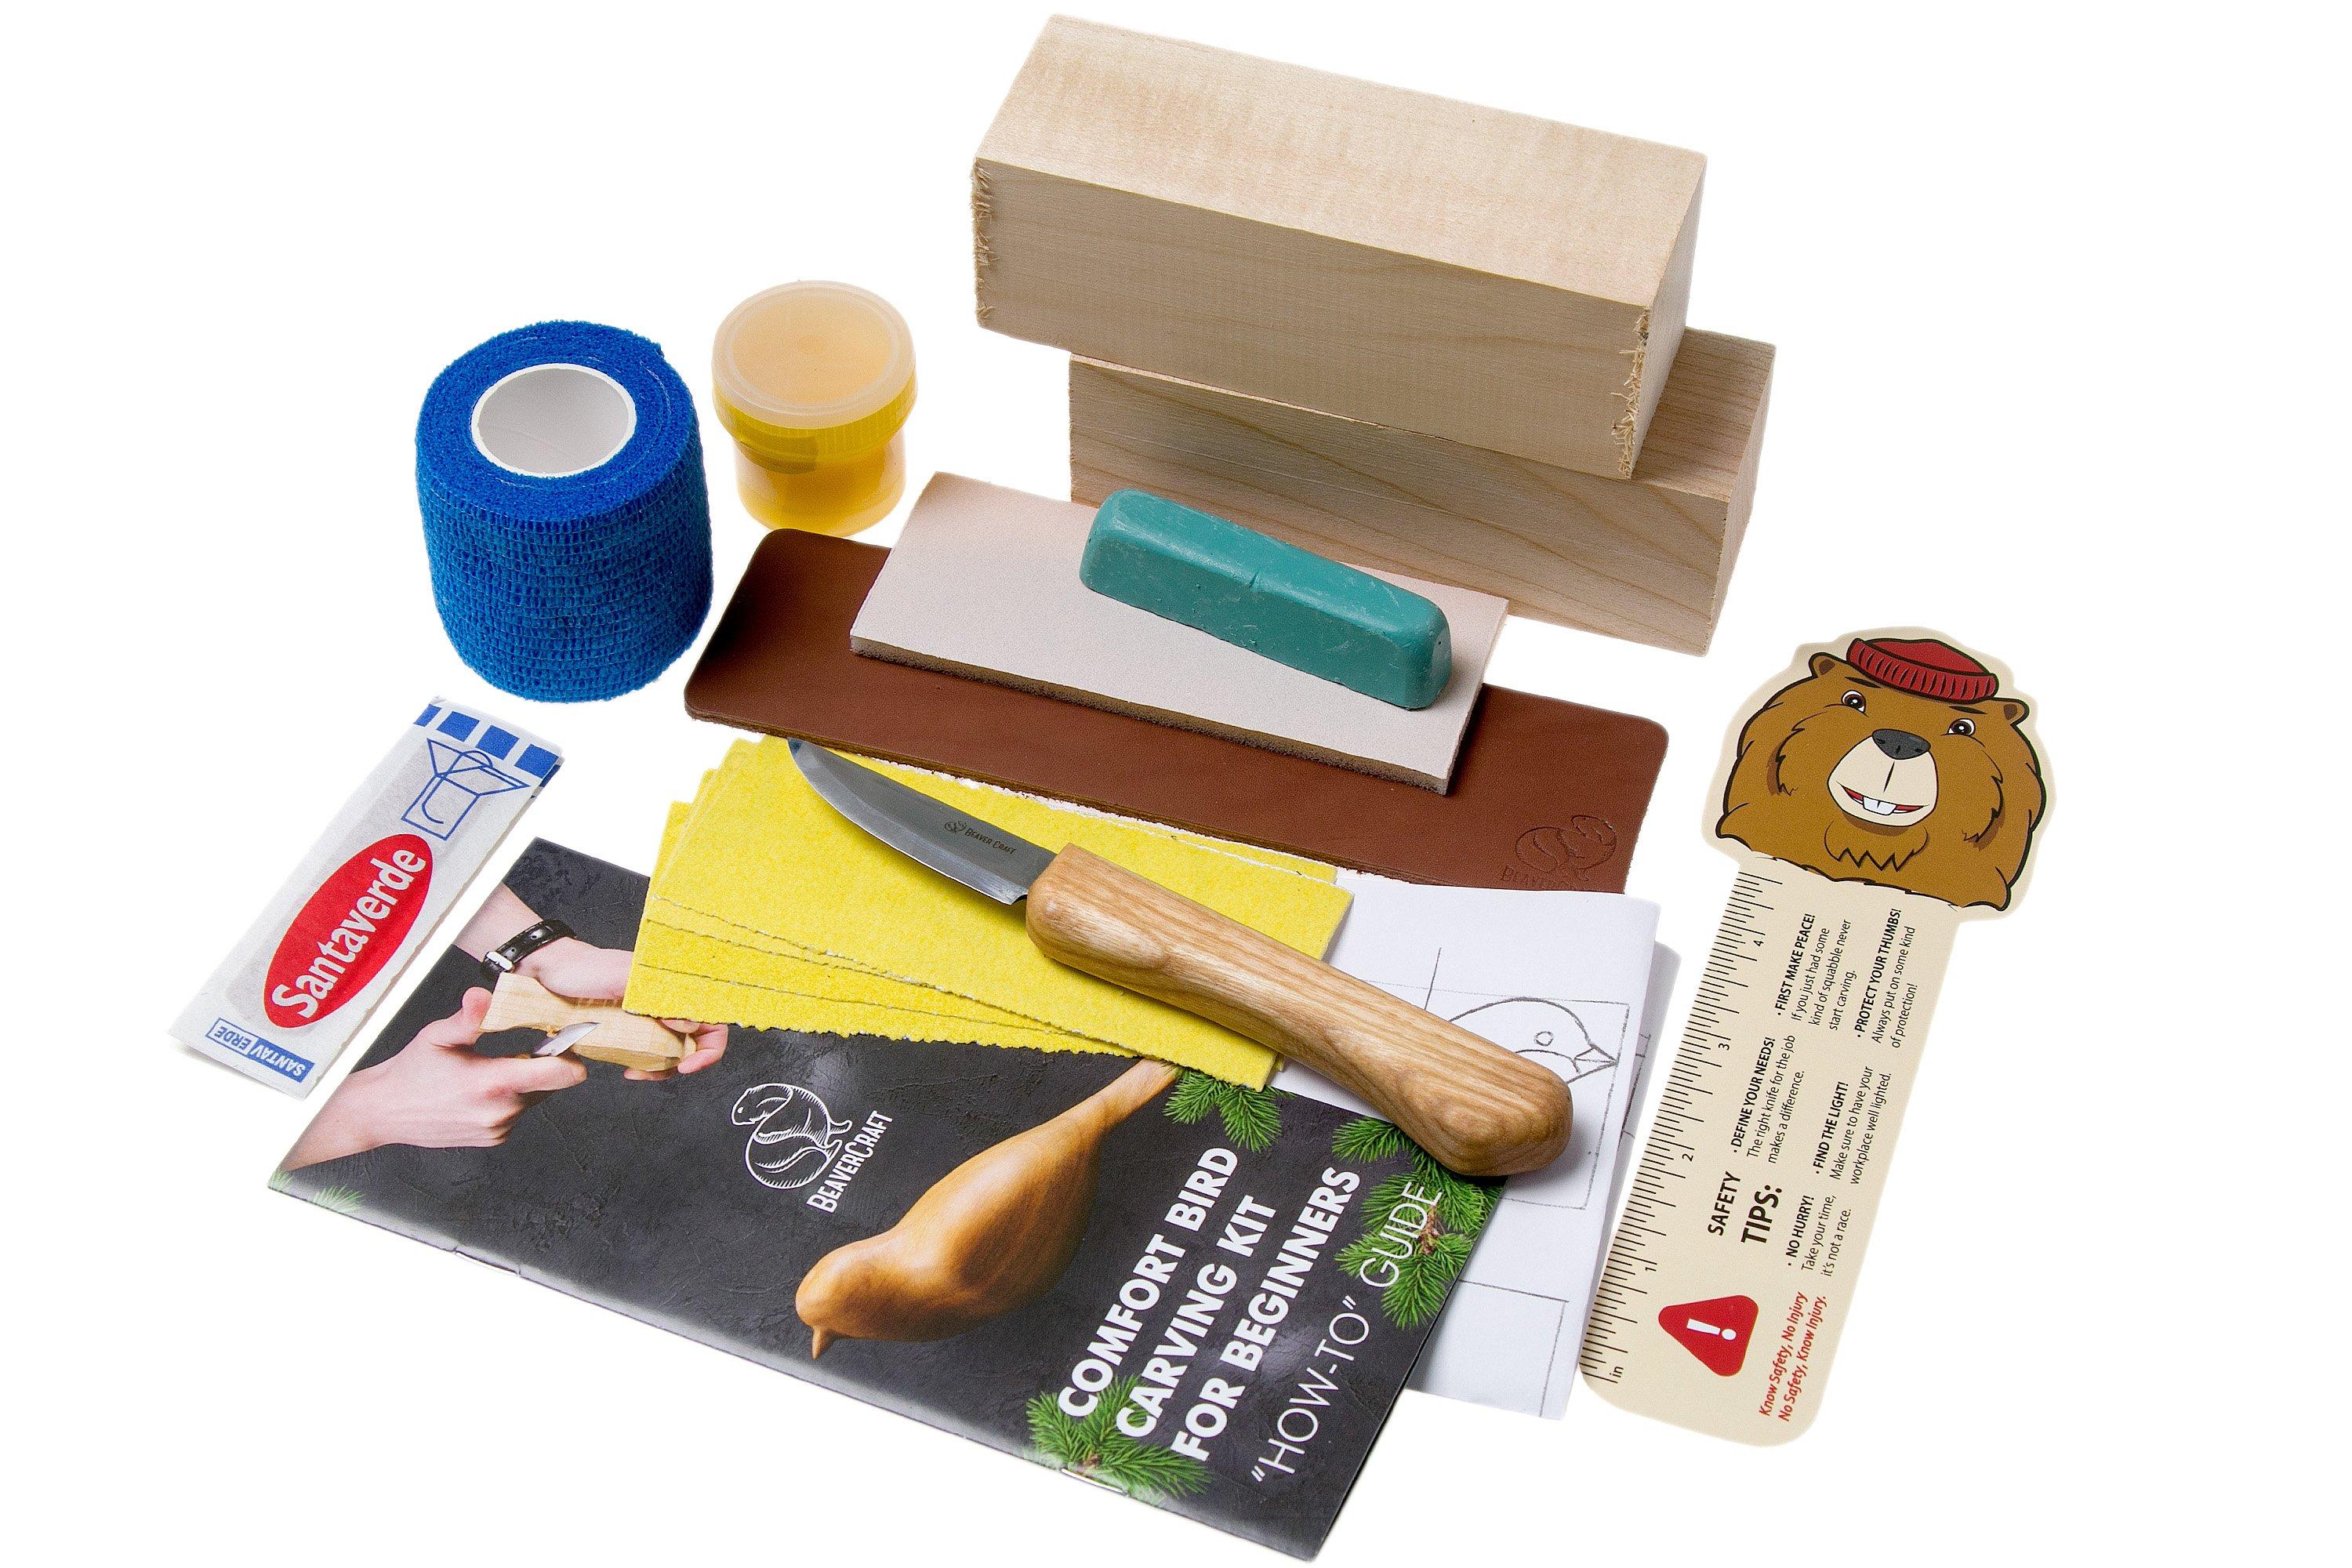 DIY01 - Comfort Bird Carving Kit - Complete Starter Whittling Kit for  Beginners Adults Teens and Kids